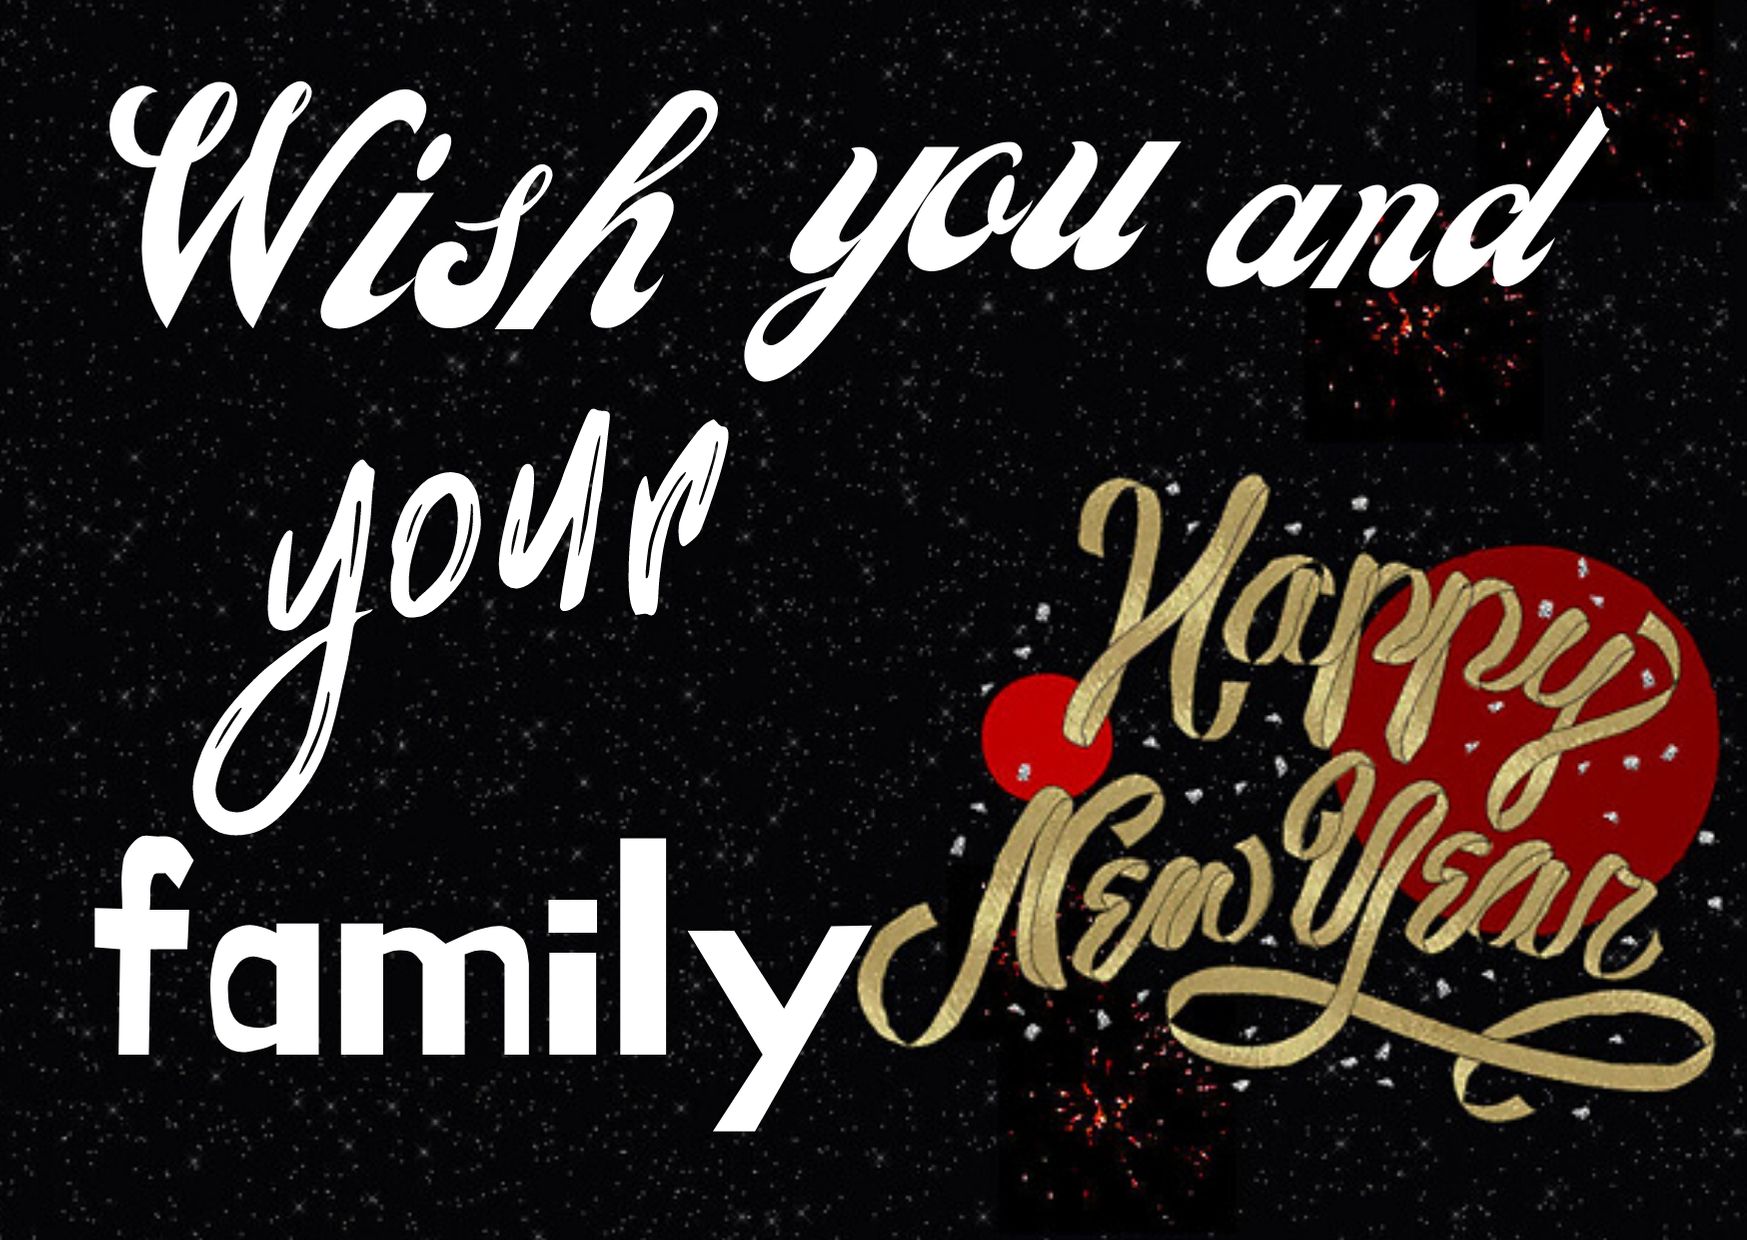 Happy New Year 2021 Family, New Year 2021 Wishes For Family. Happy New Year 2021 HD image